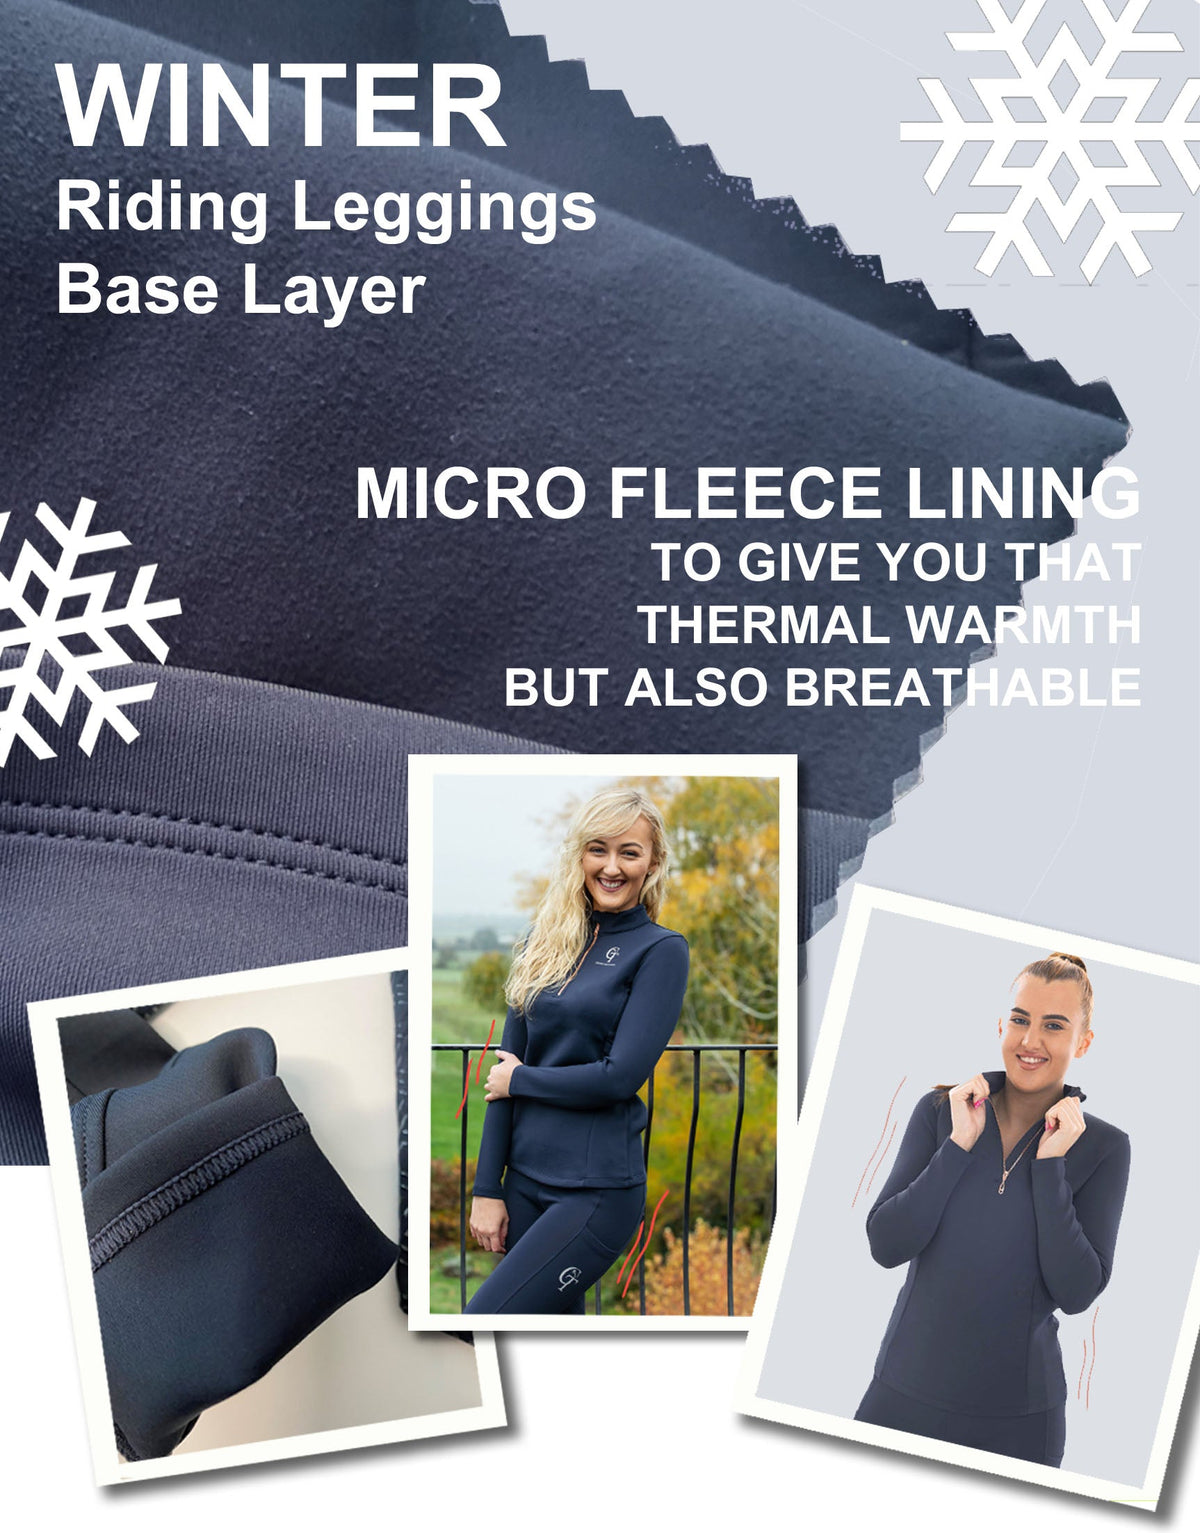 Embrace the cold with CT Fleece Lined Riding Leggings and Base